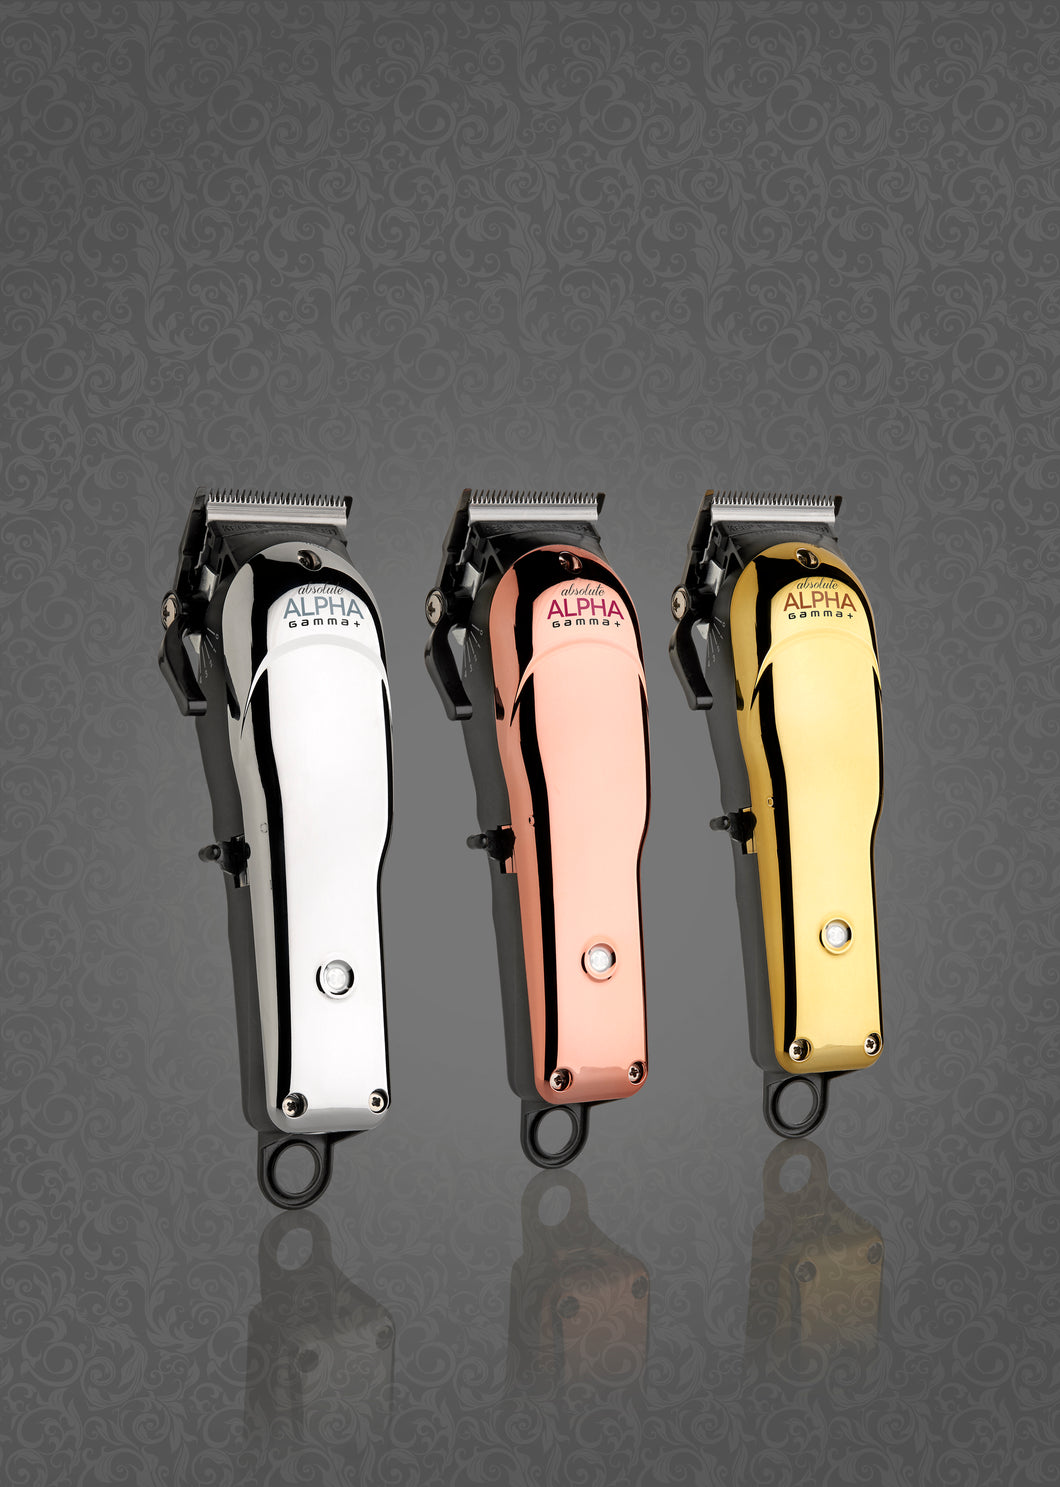 Gamma+ Absolute Alpha Clipper 2.0 Updated Edition with Faper DLC blade and Stretch bracket